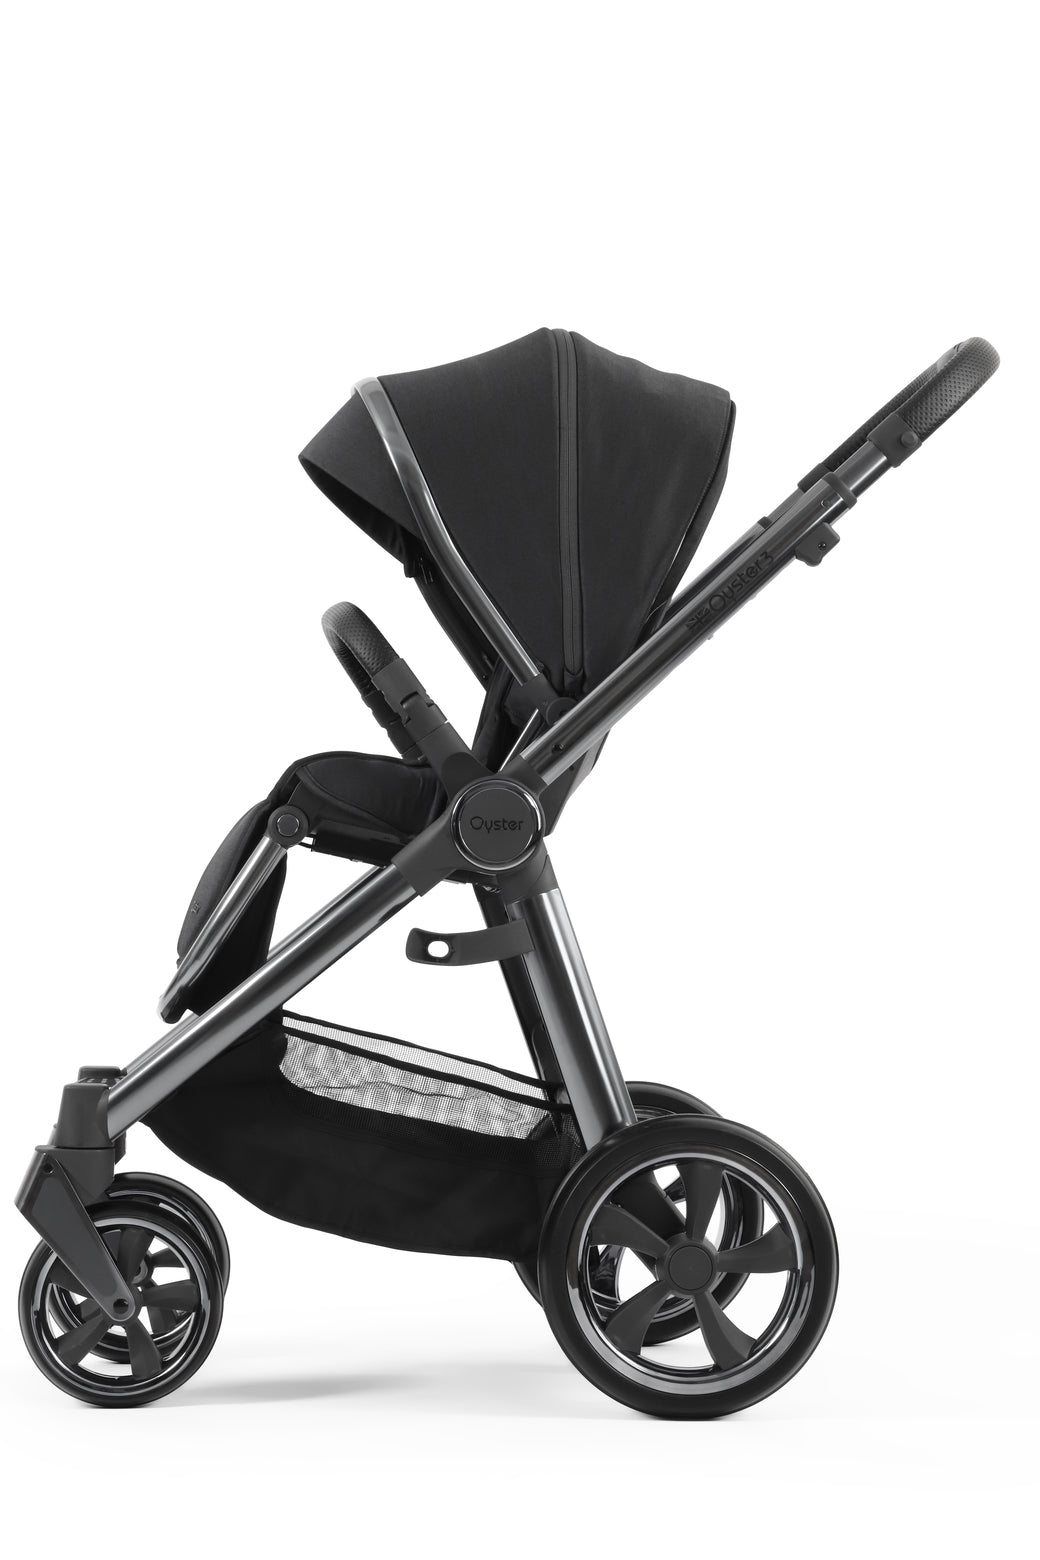 Babystyle Oyster 3 Pushchair - Carbonite - For Your Little One